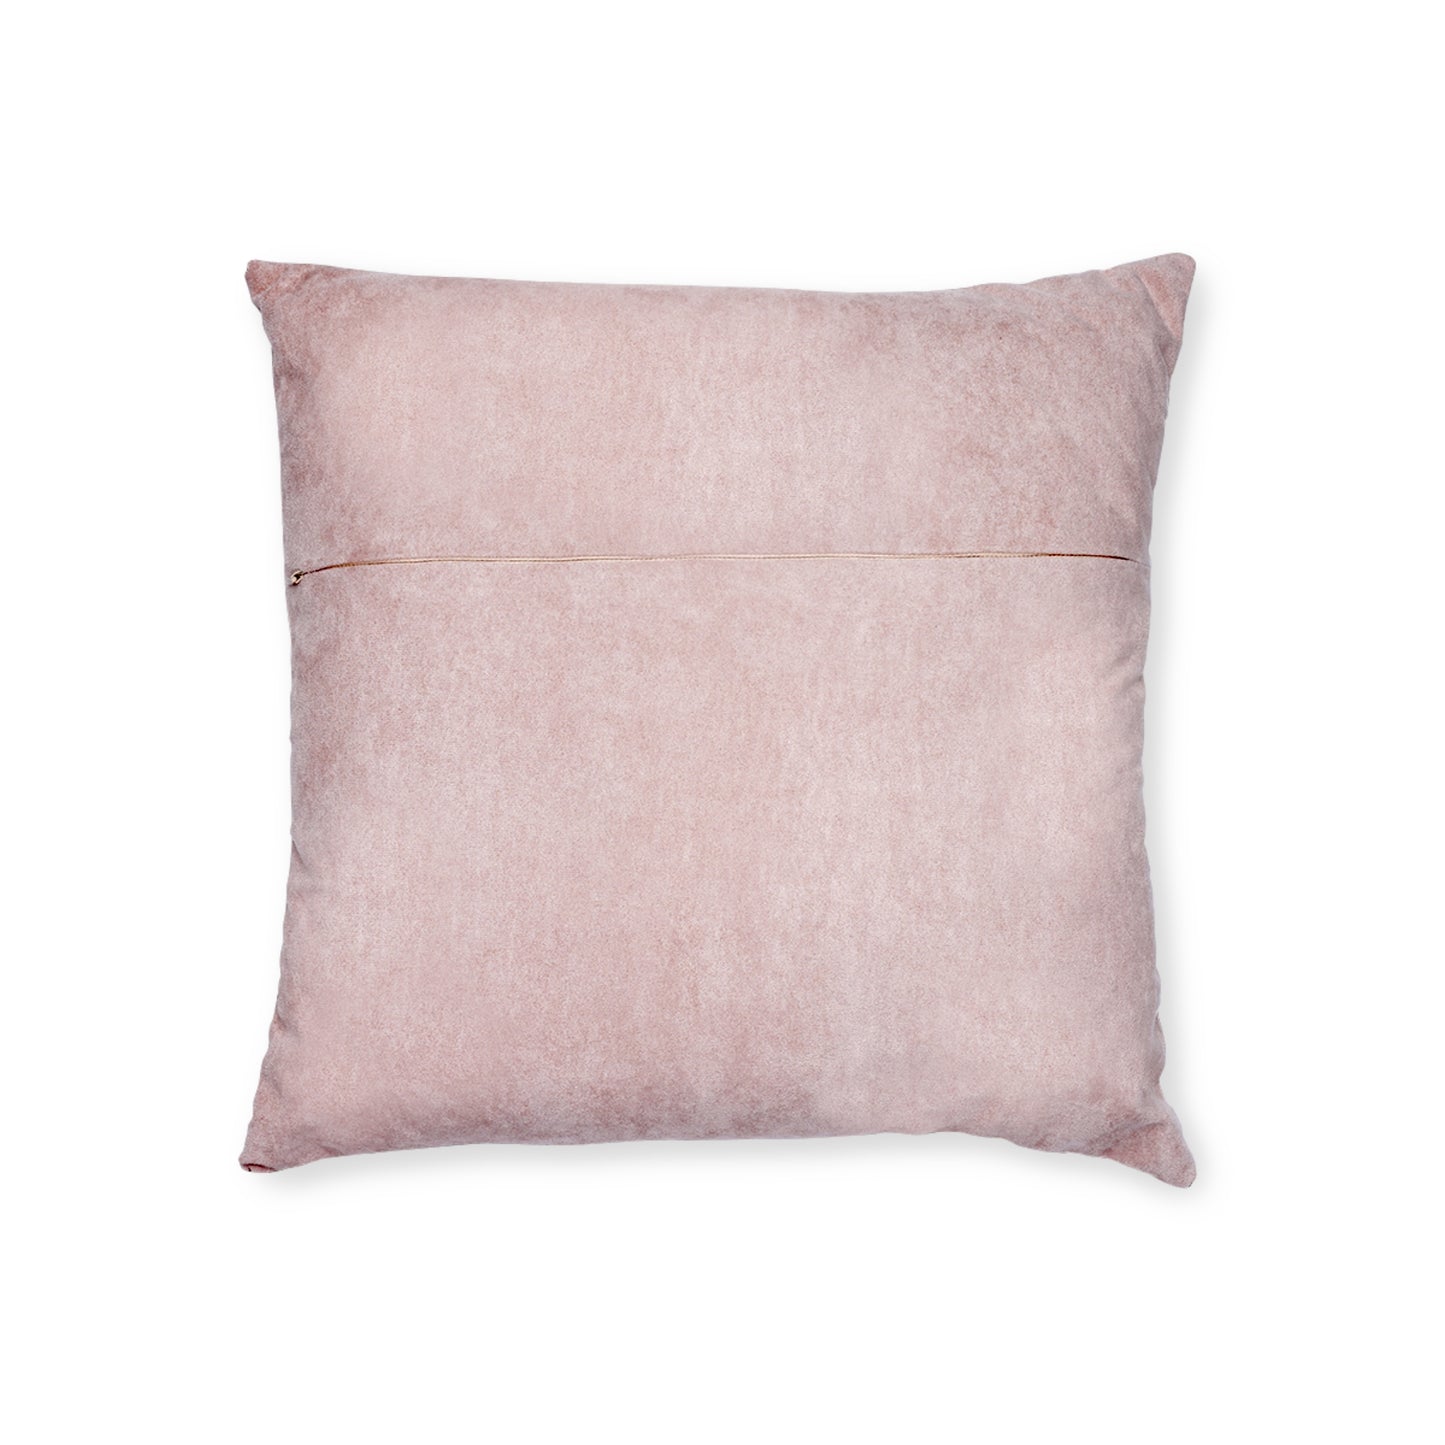 Hope is my Superpower Square Pillow - Pink Back